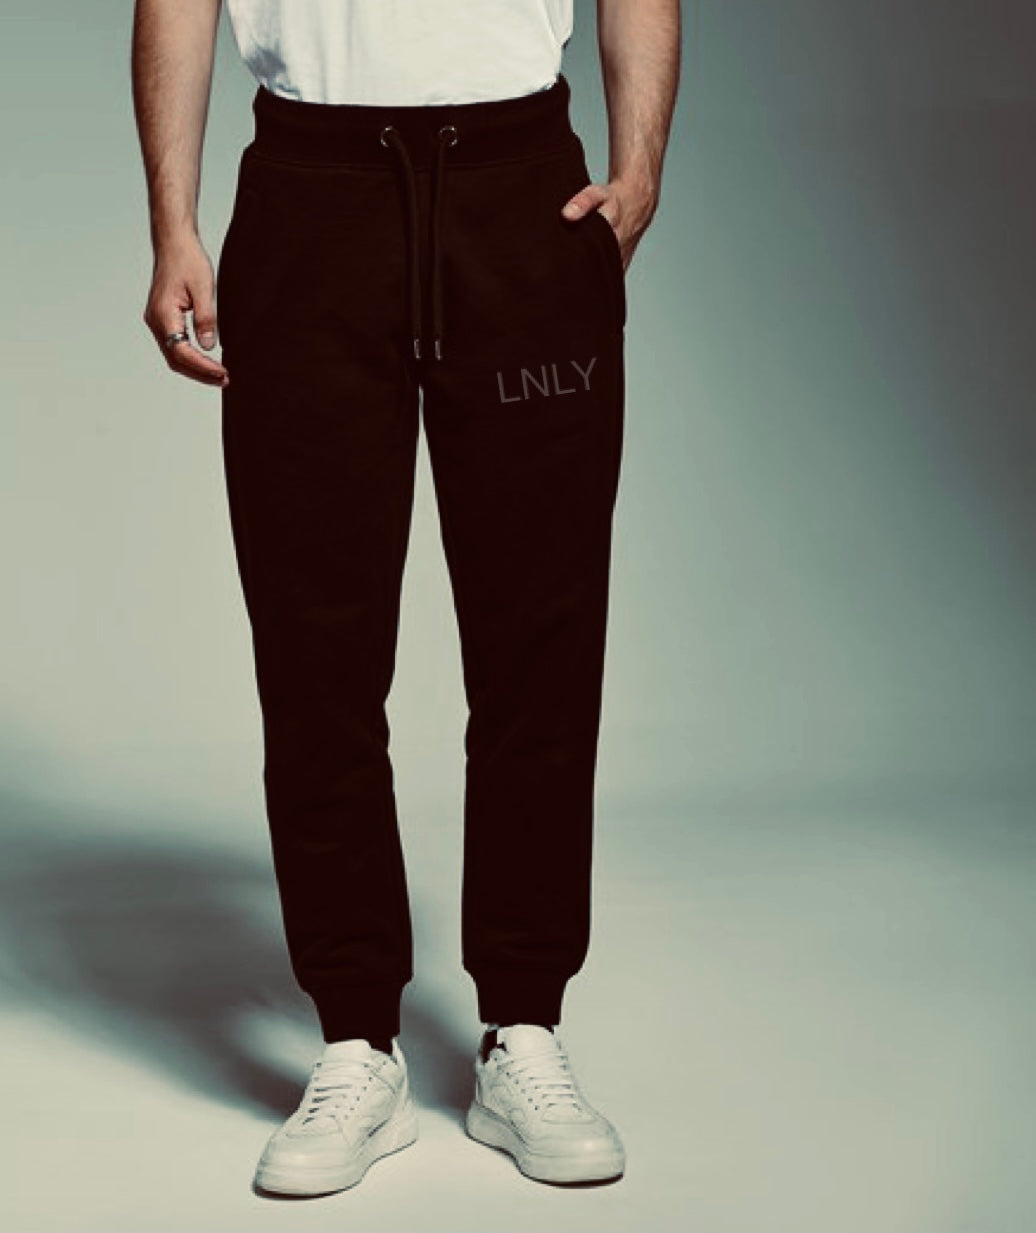 LNLY Joggers